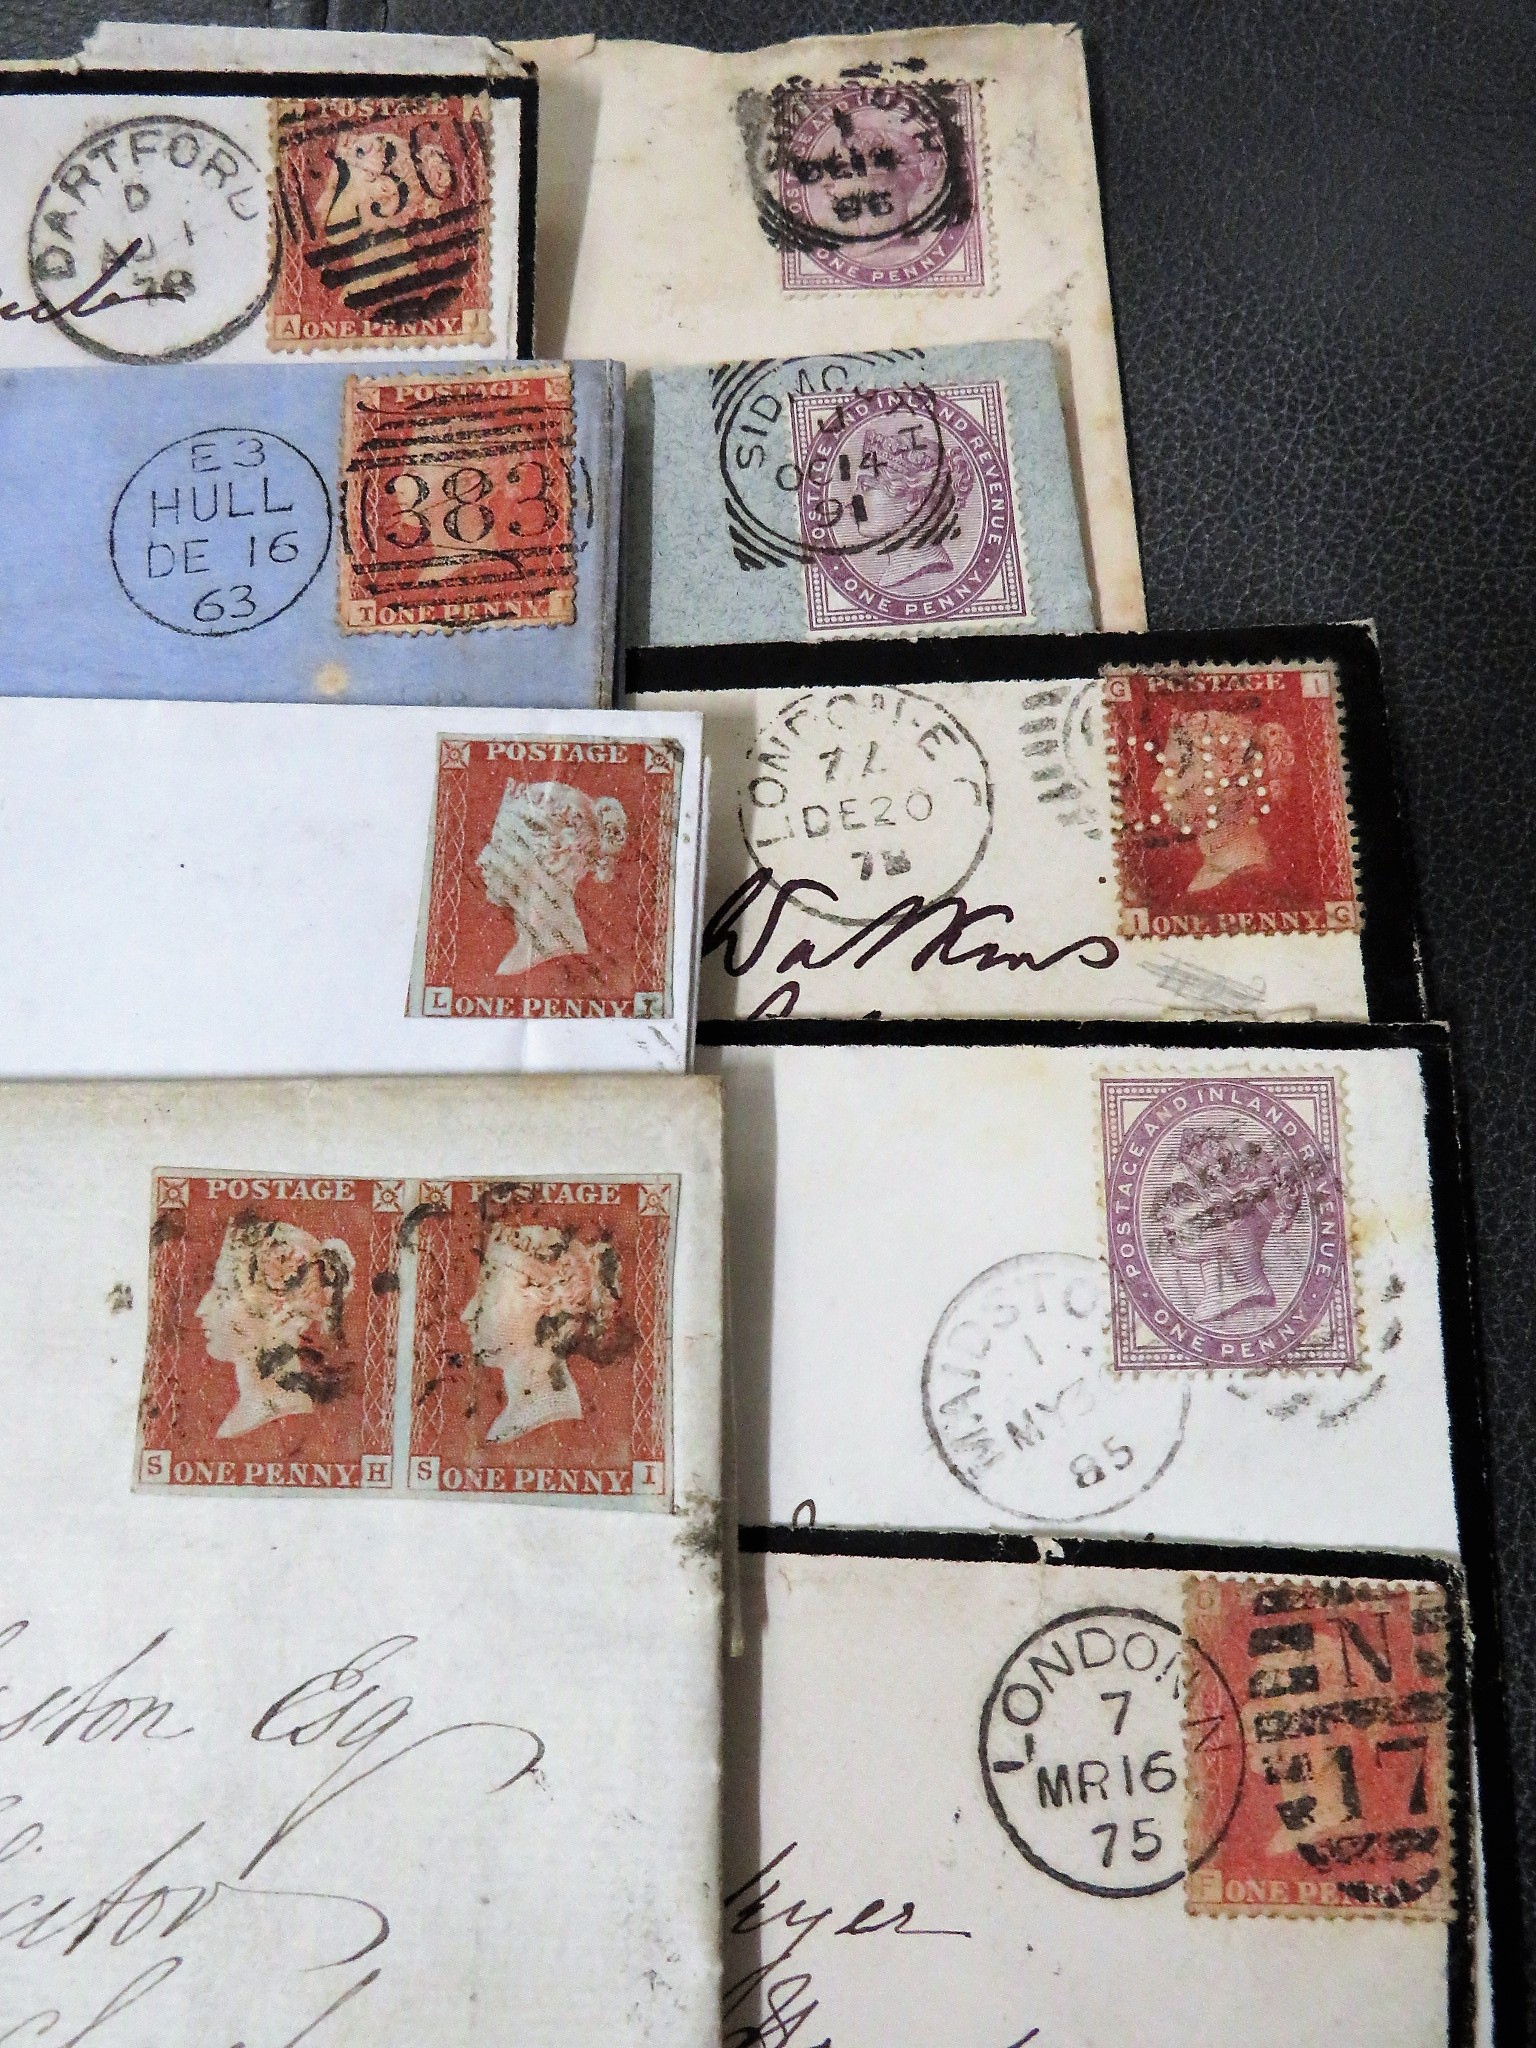 PRE-STAMP COVERS PLUS SOME QV COVERS. - Image 7 of 7